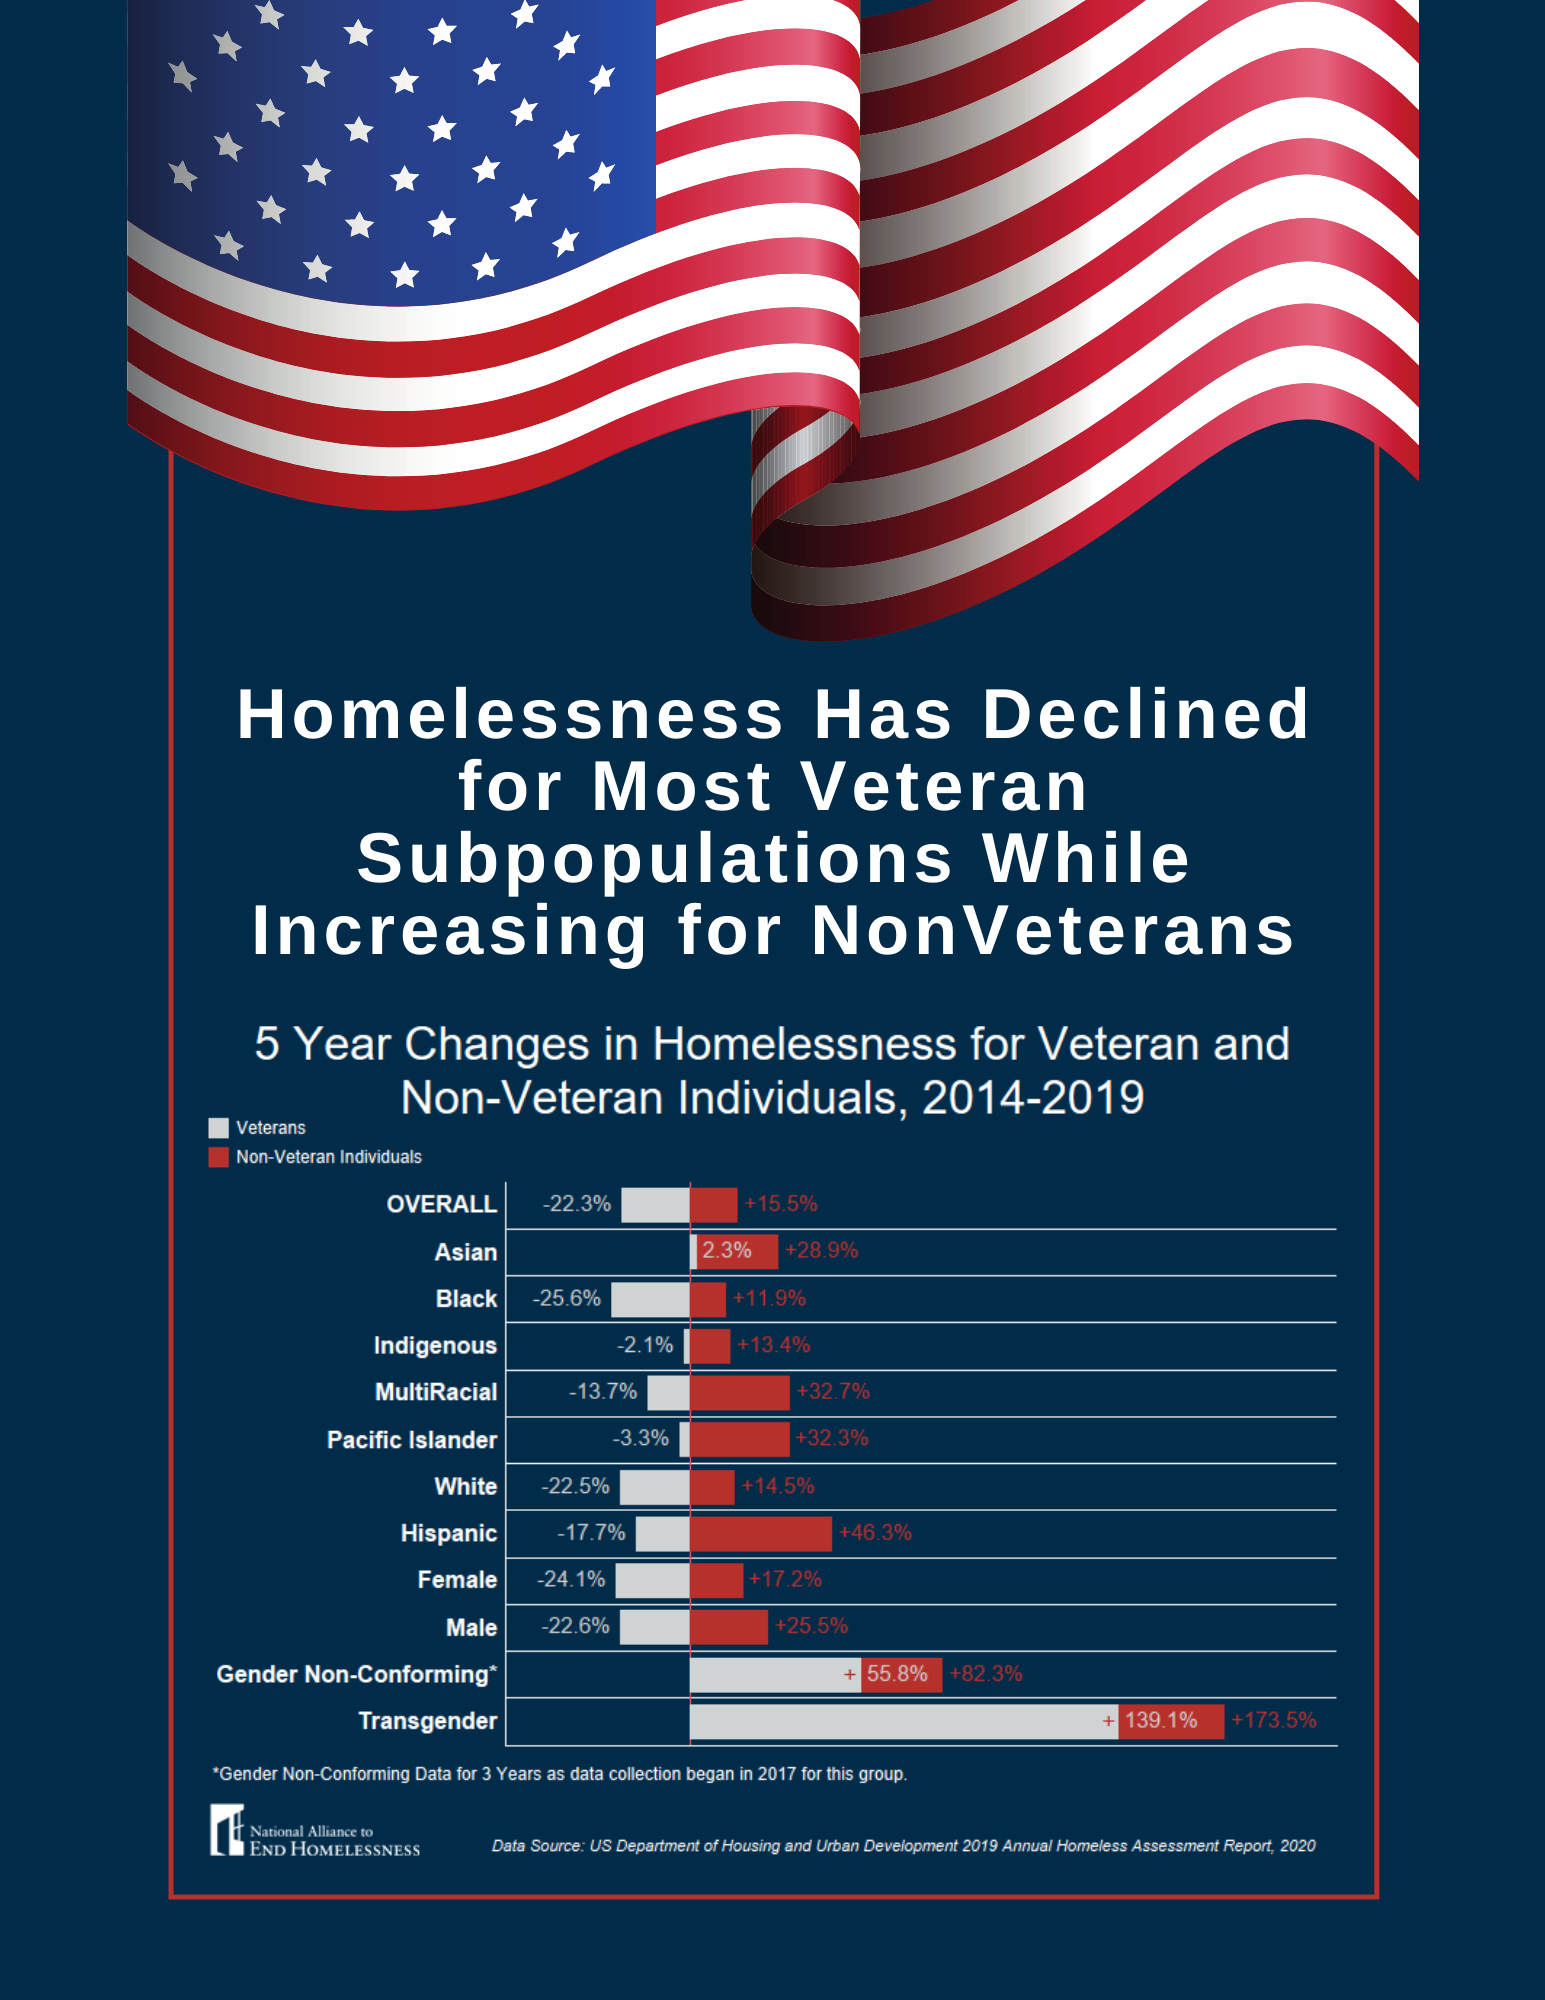 5 Key Facts About Homeless Veterans National Alliance to End Homelessness